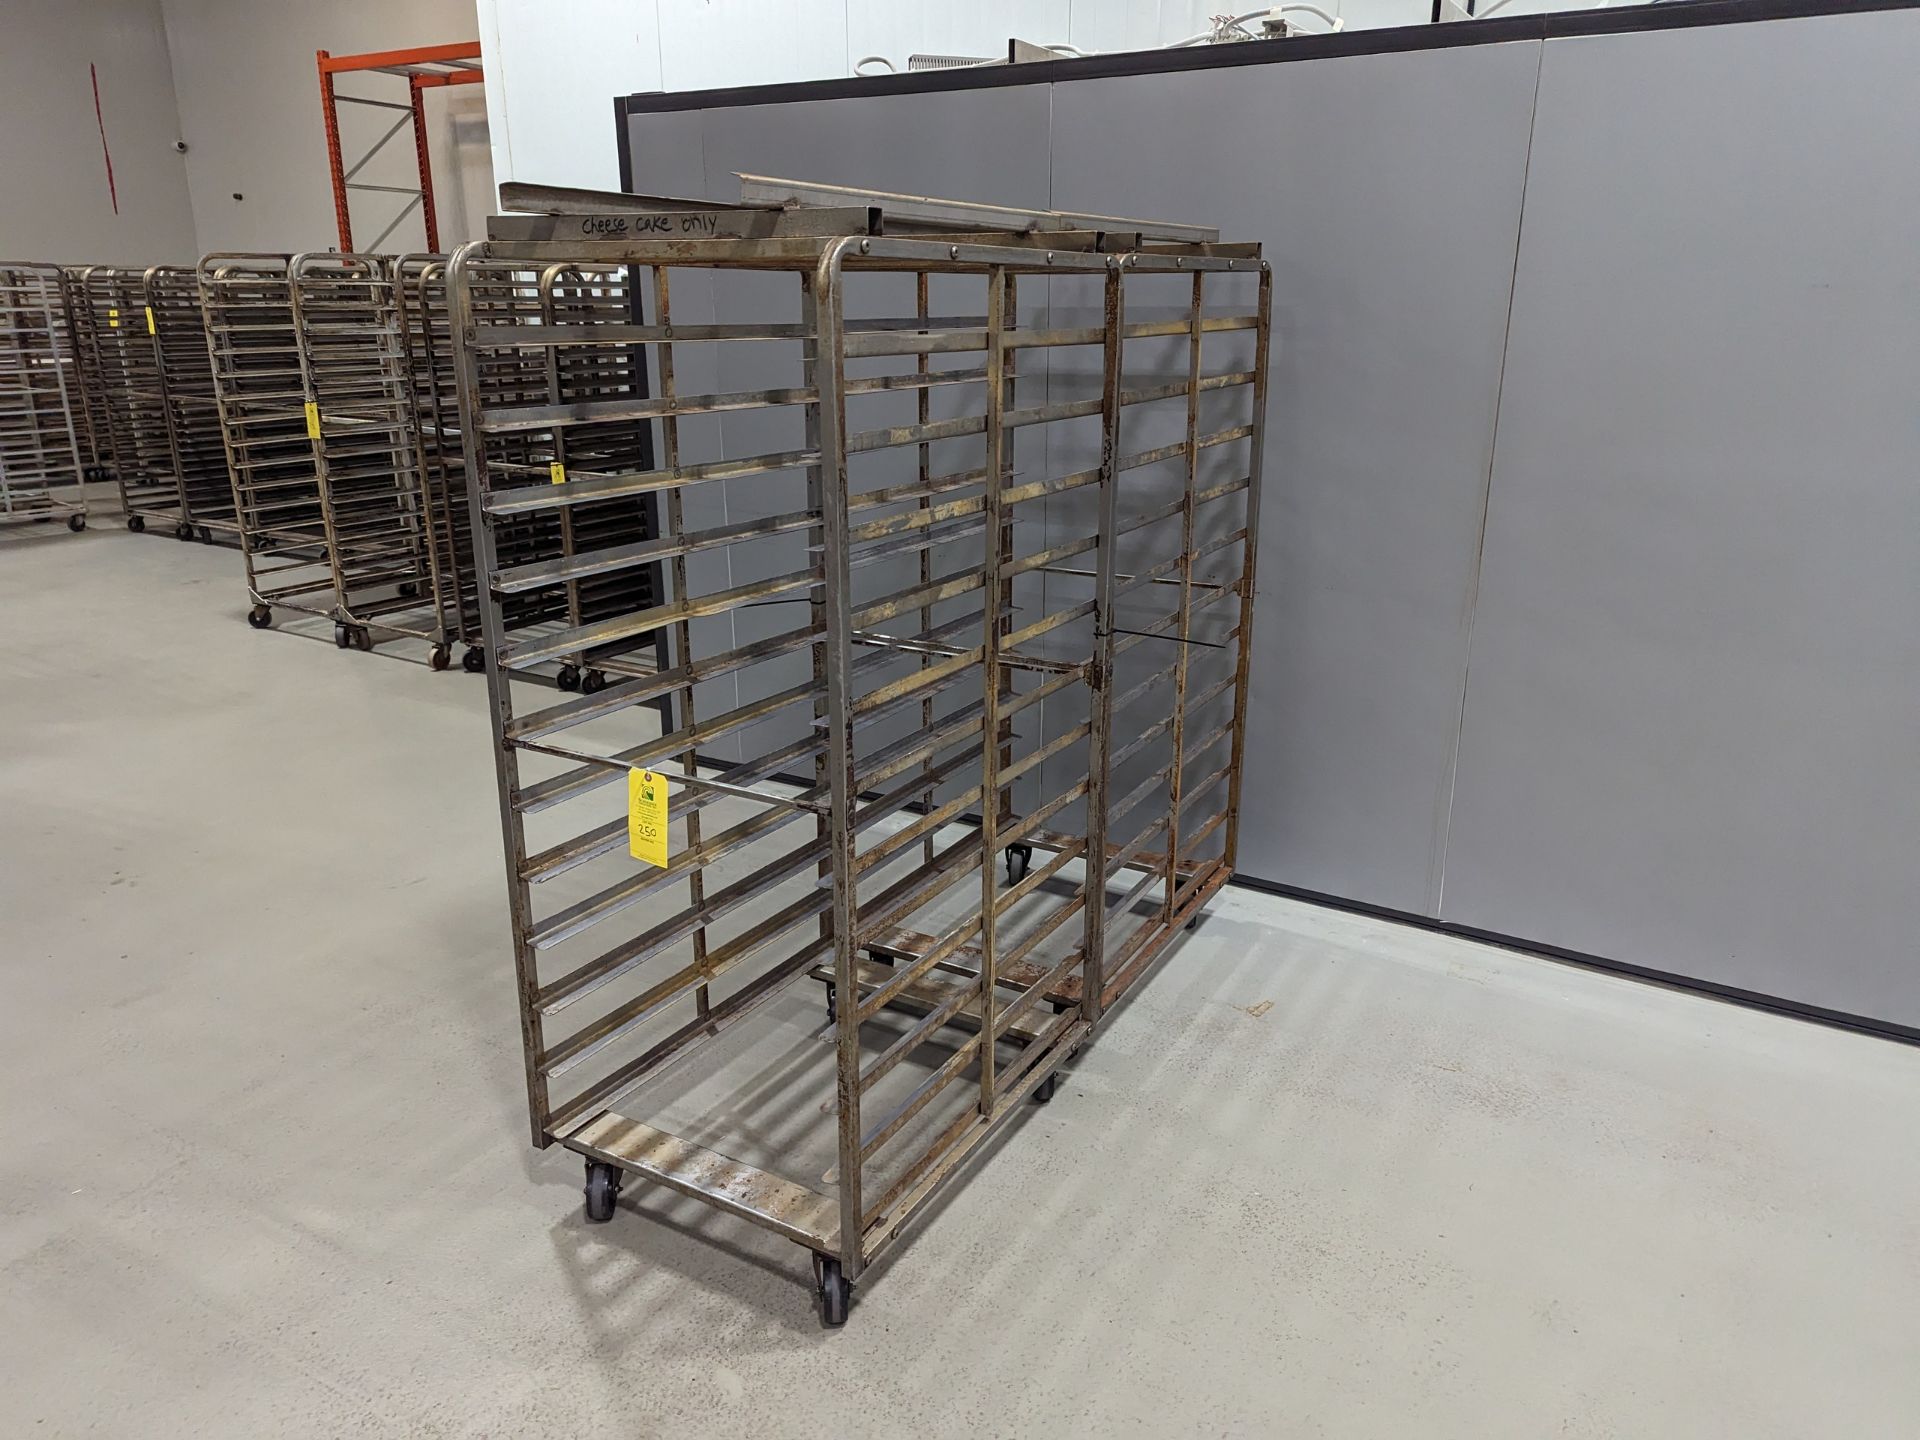 Lot of 2 Double Wide Stainless Steel Bakery Racks, Dimensions LxWxH: 72x28x69 Measurements are for - Image 2 of 6